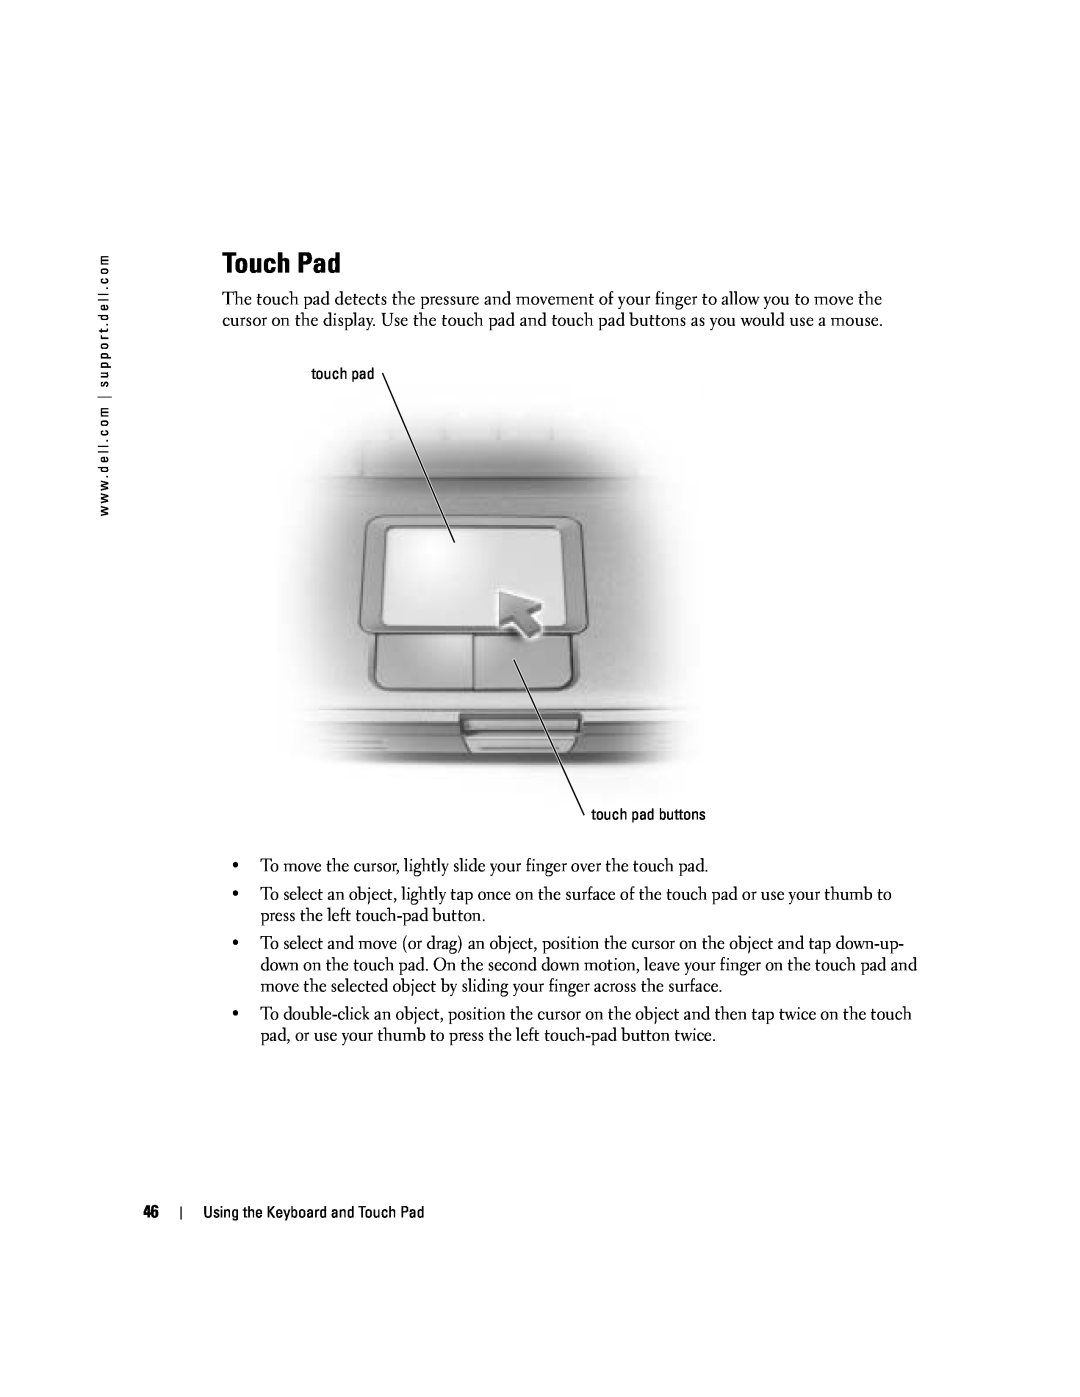 Dell PP10L owner manual Touch Pad 